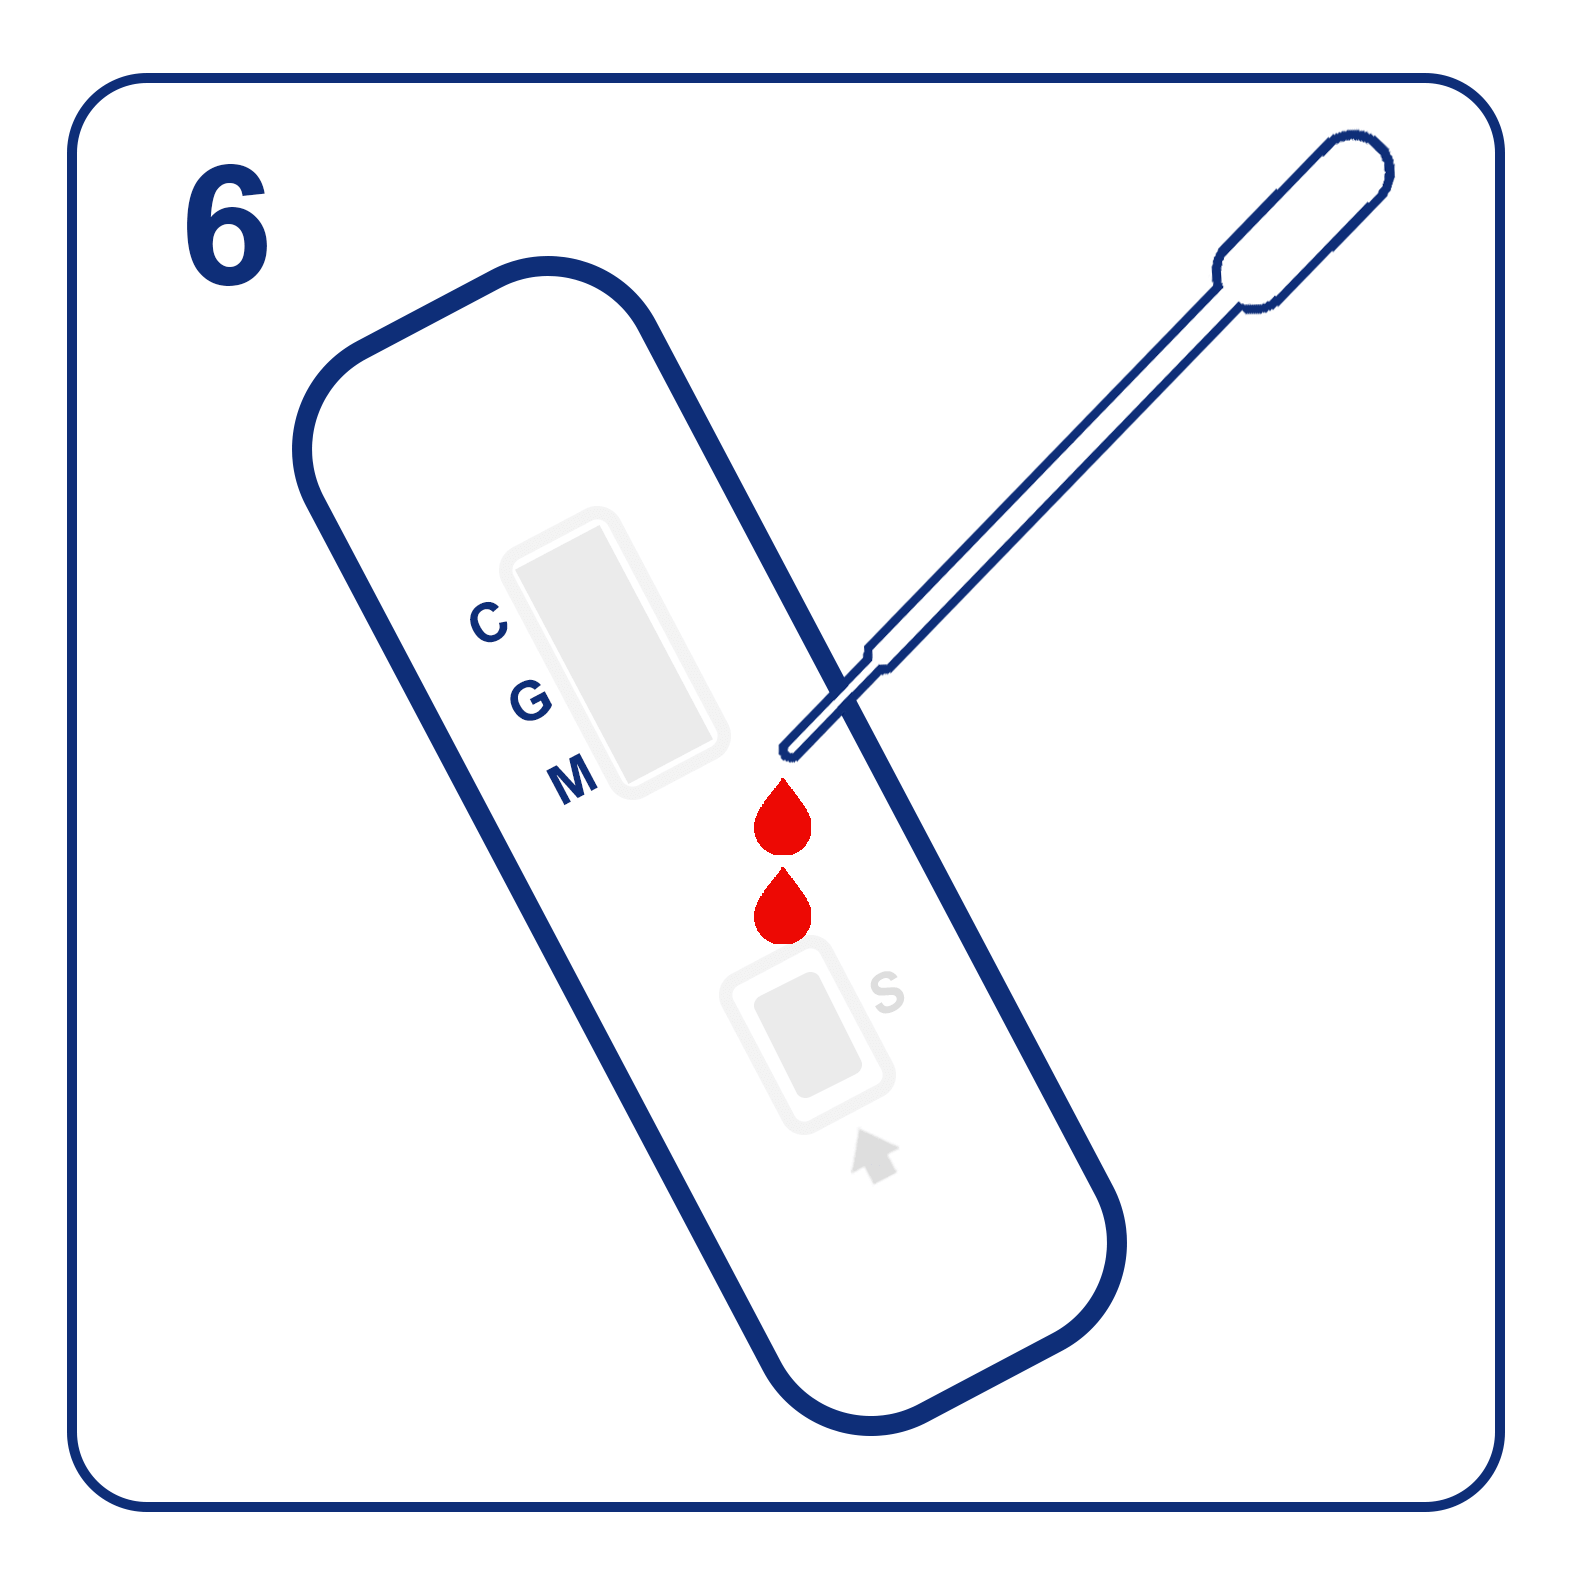 Add 1 drop of blood (using the pipette provided) into the cassette’s well directly above the arrow.